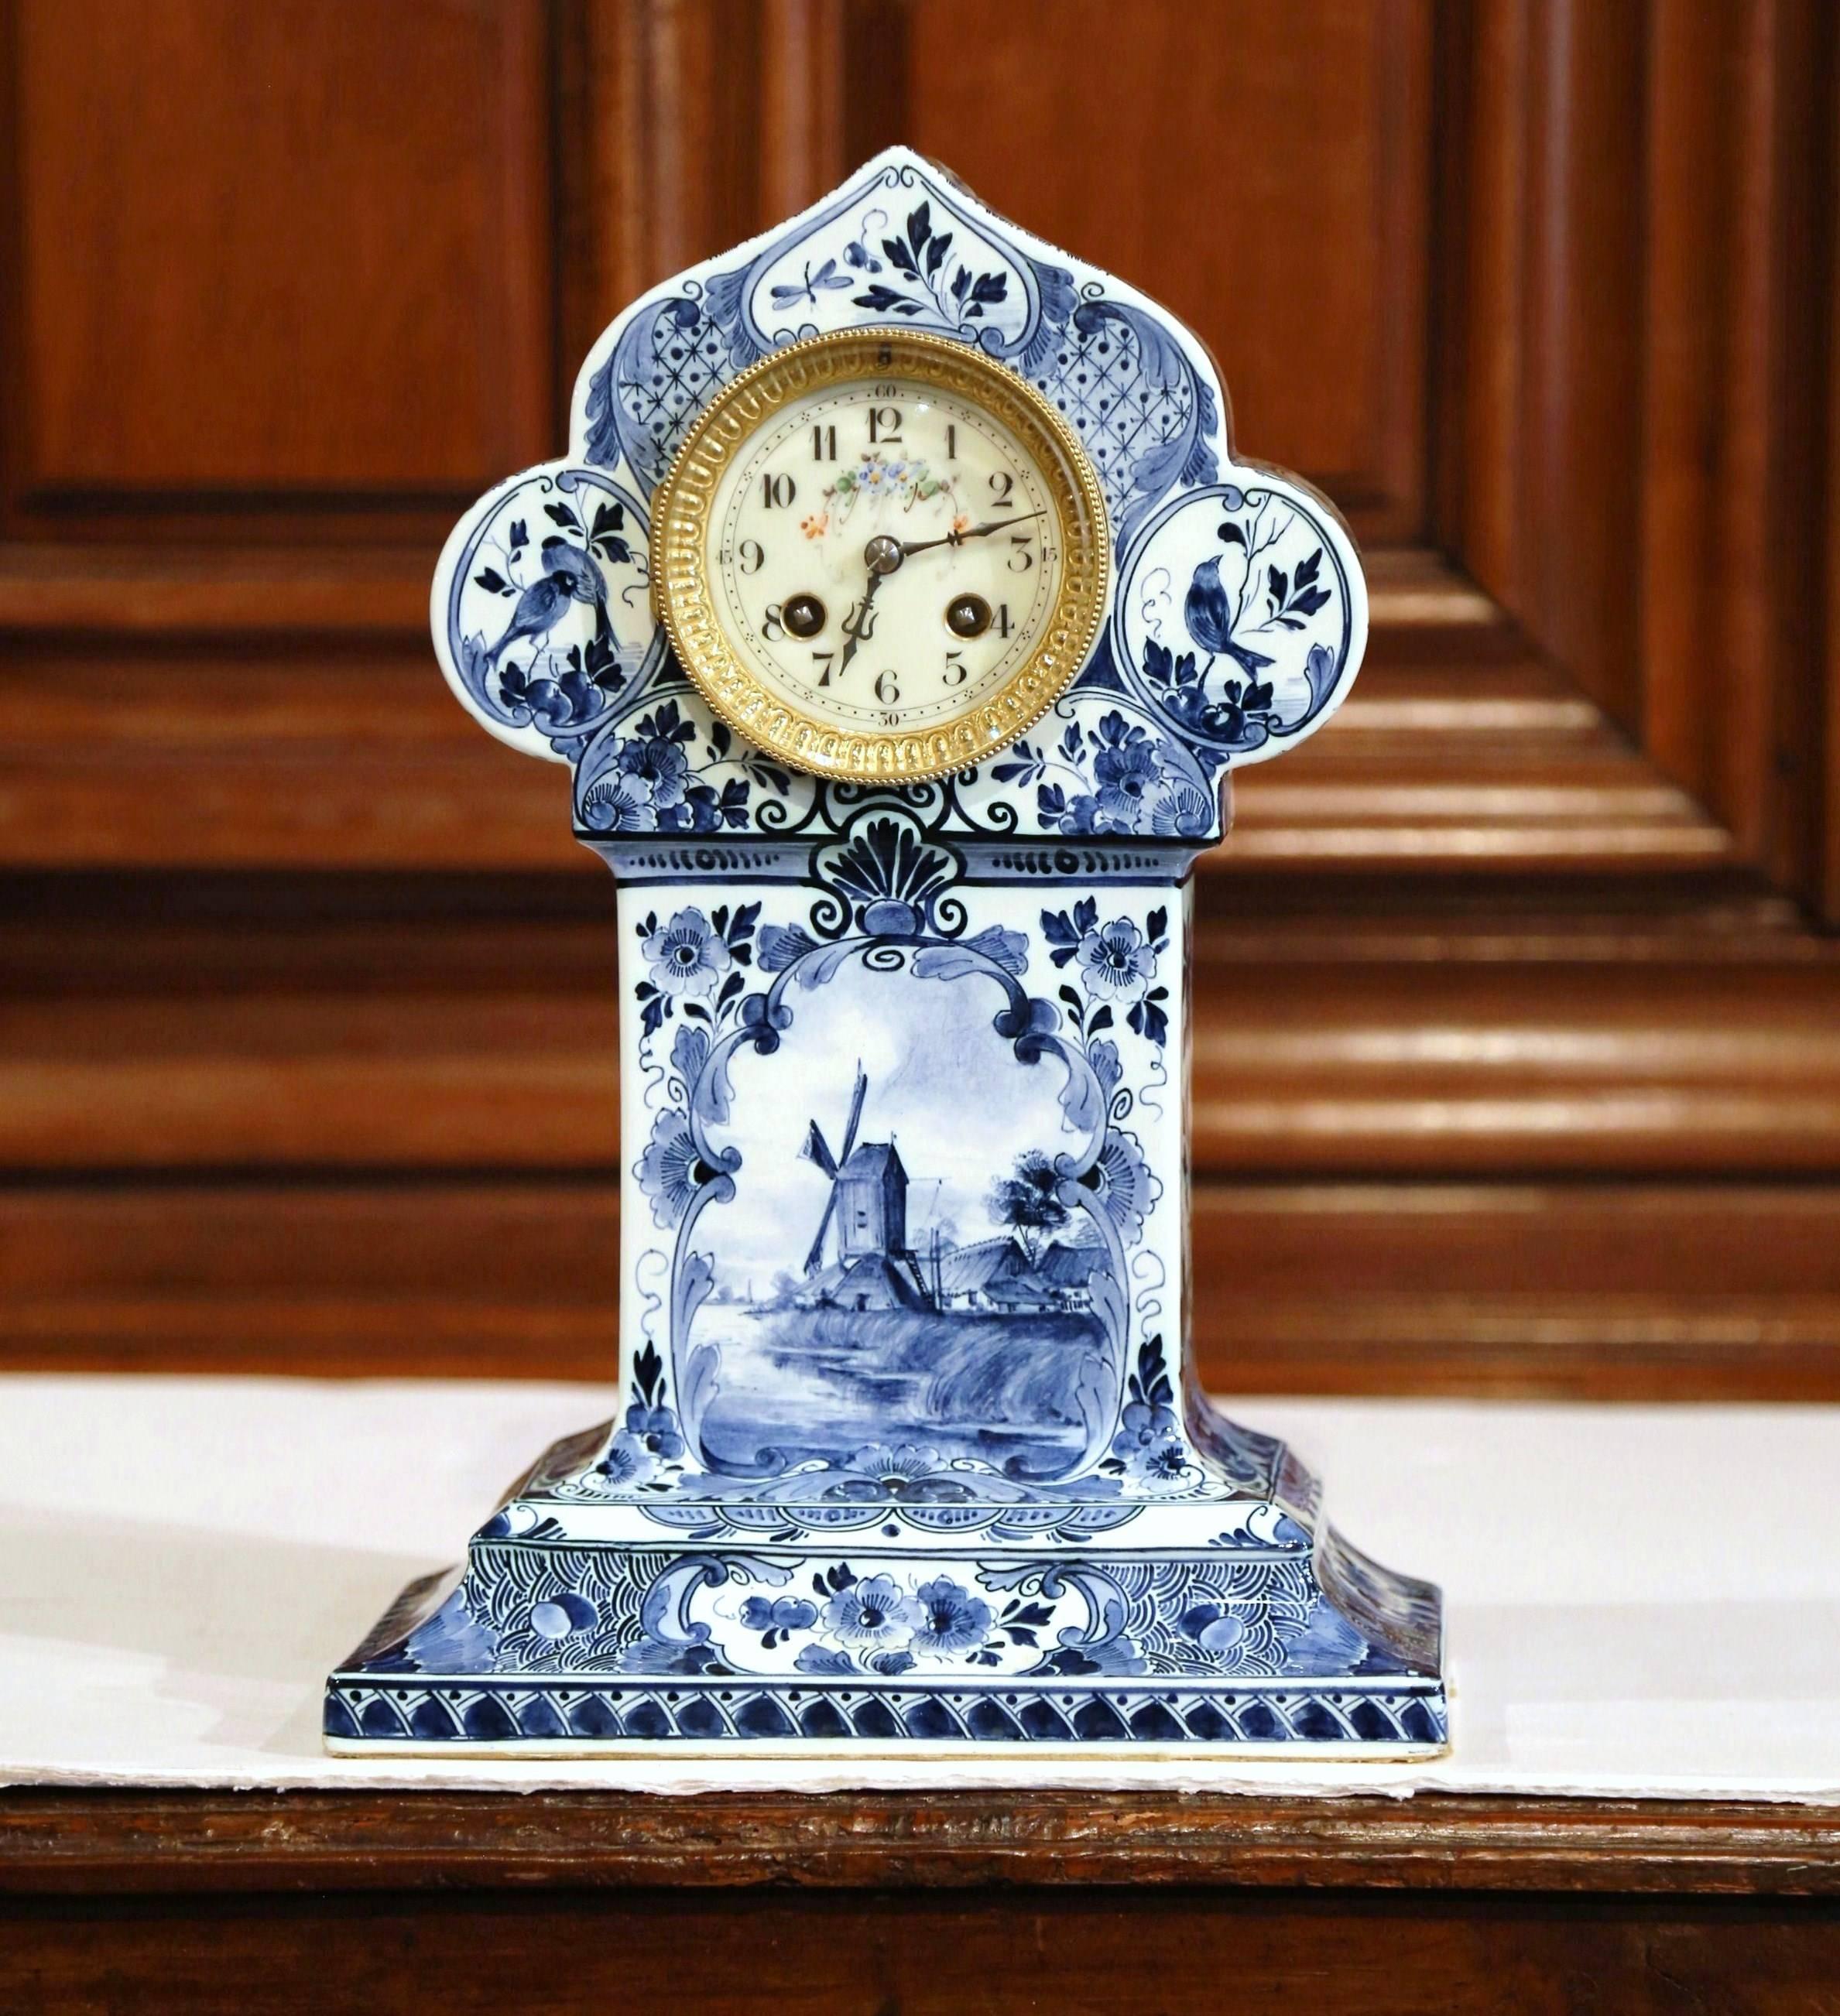 Complete your mantel or desk with this antique, hand painted mantel clock. Created in Holland, circa 1920, and signed 